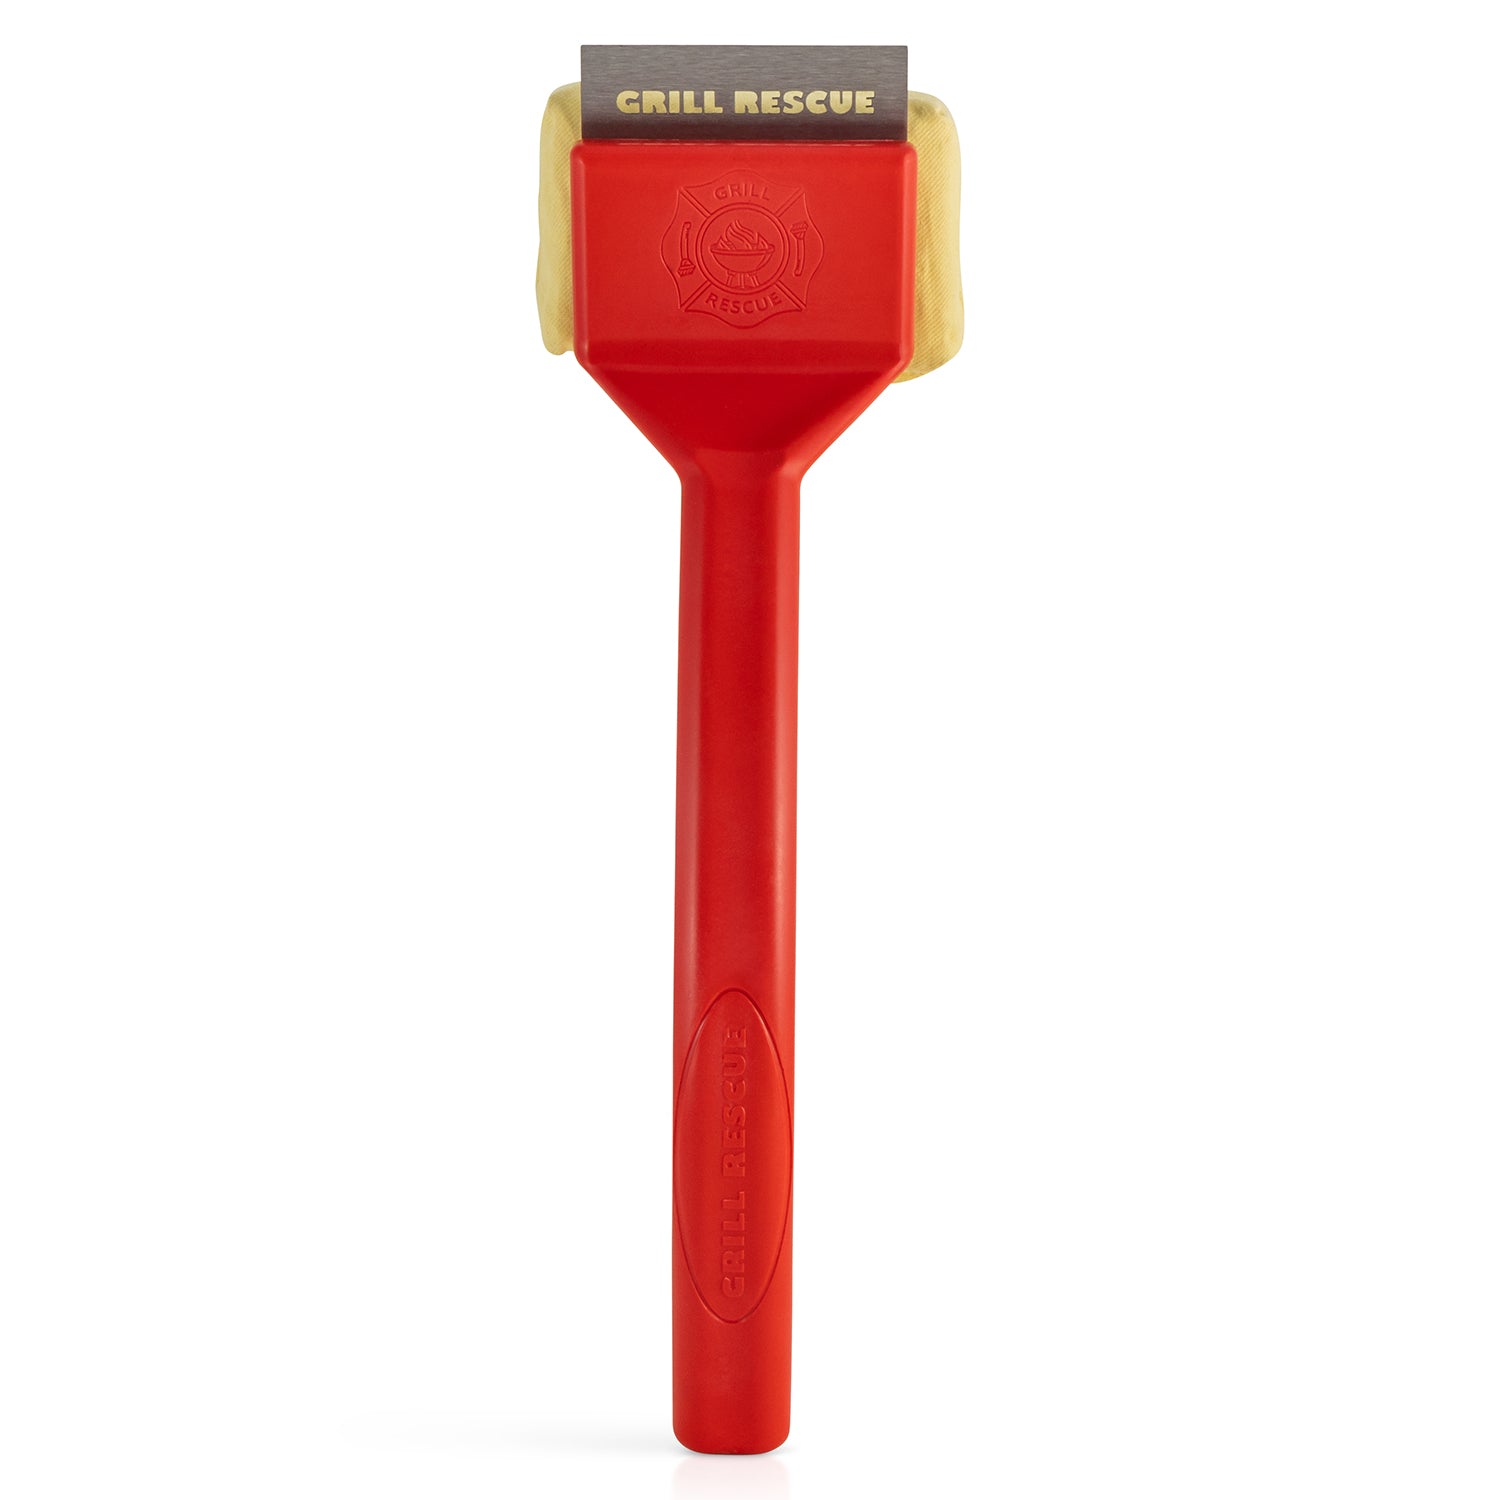 Grill Rescue GR-SCRAPER-S Grill Brush, Red/Yellow - image 4 of 5